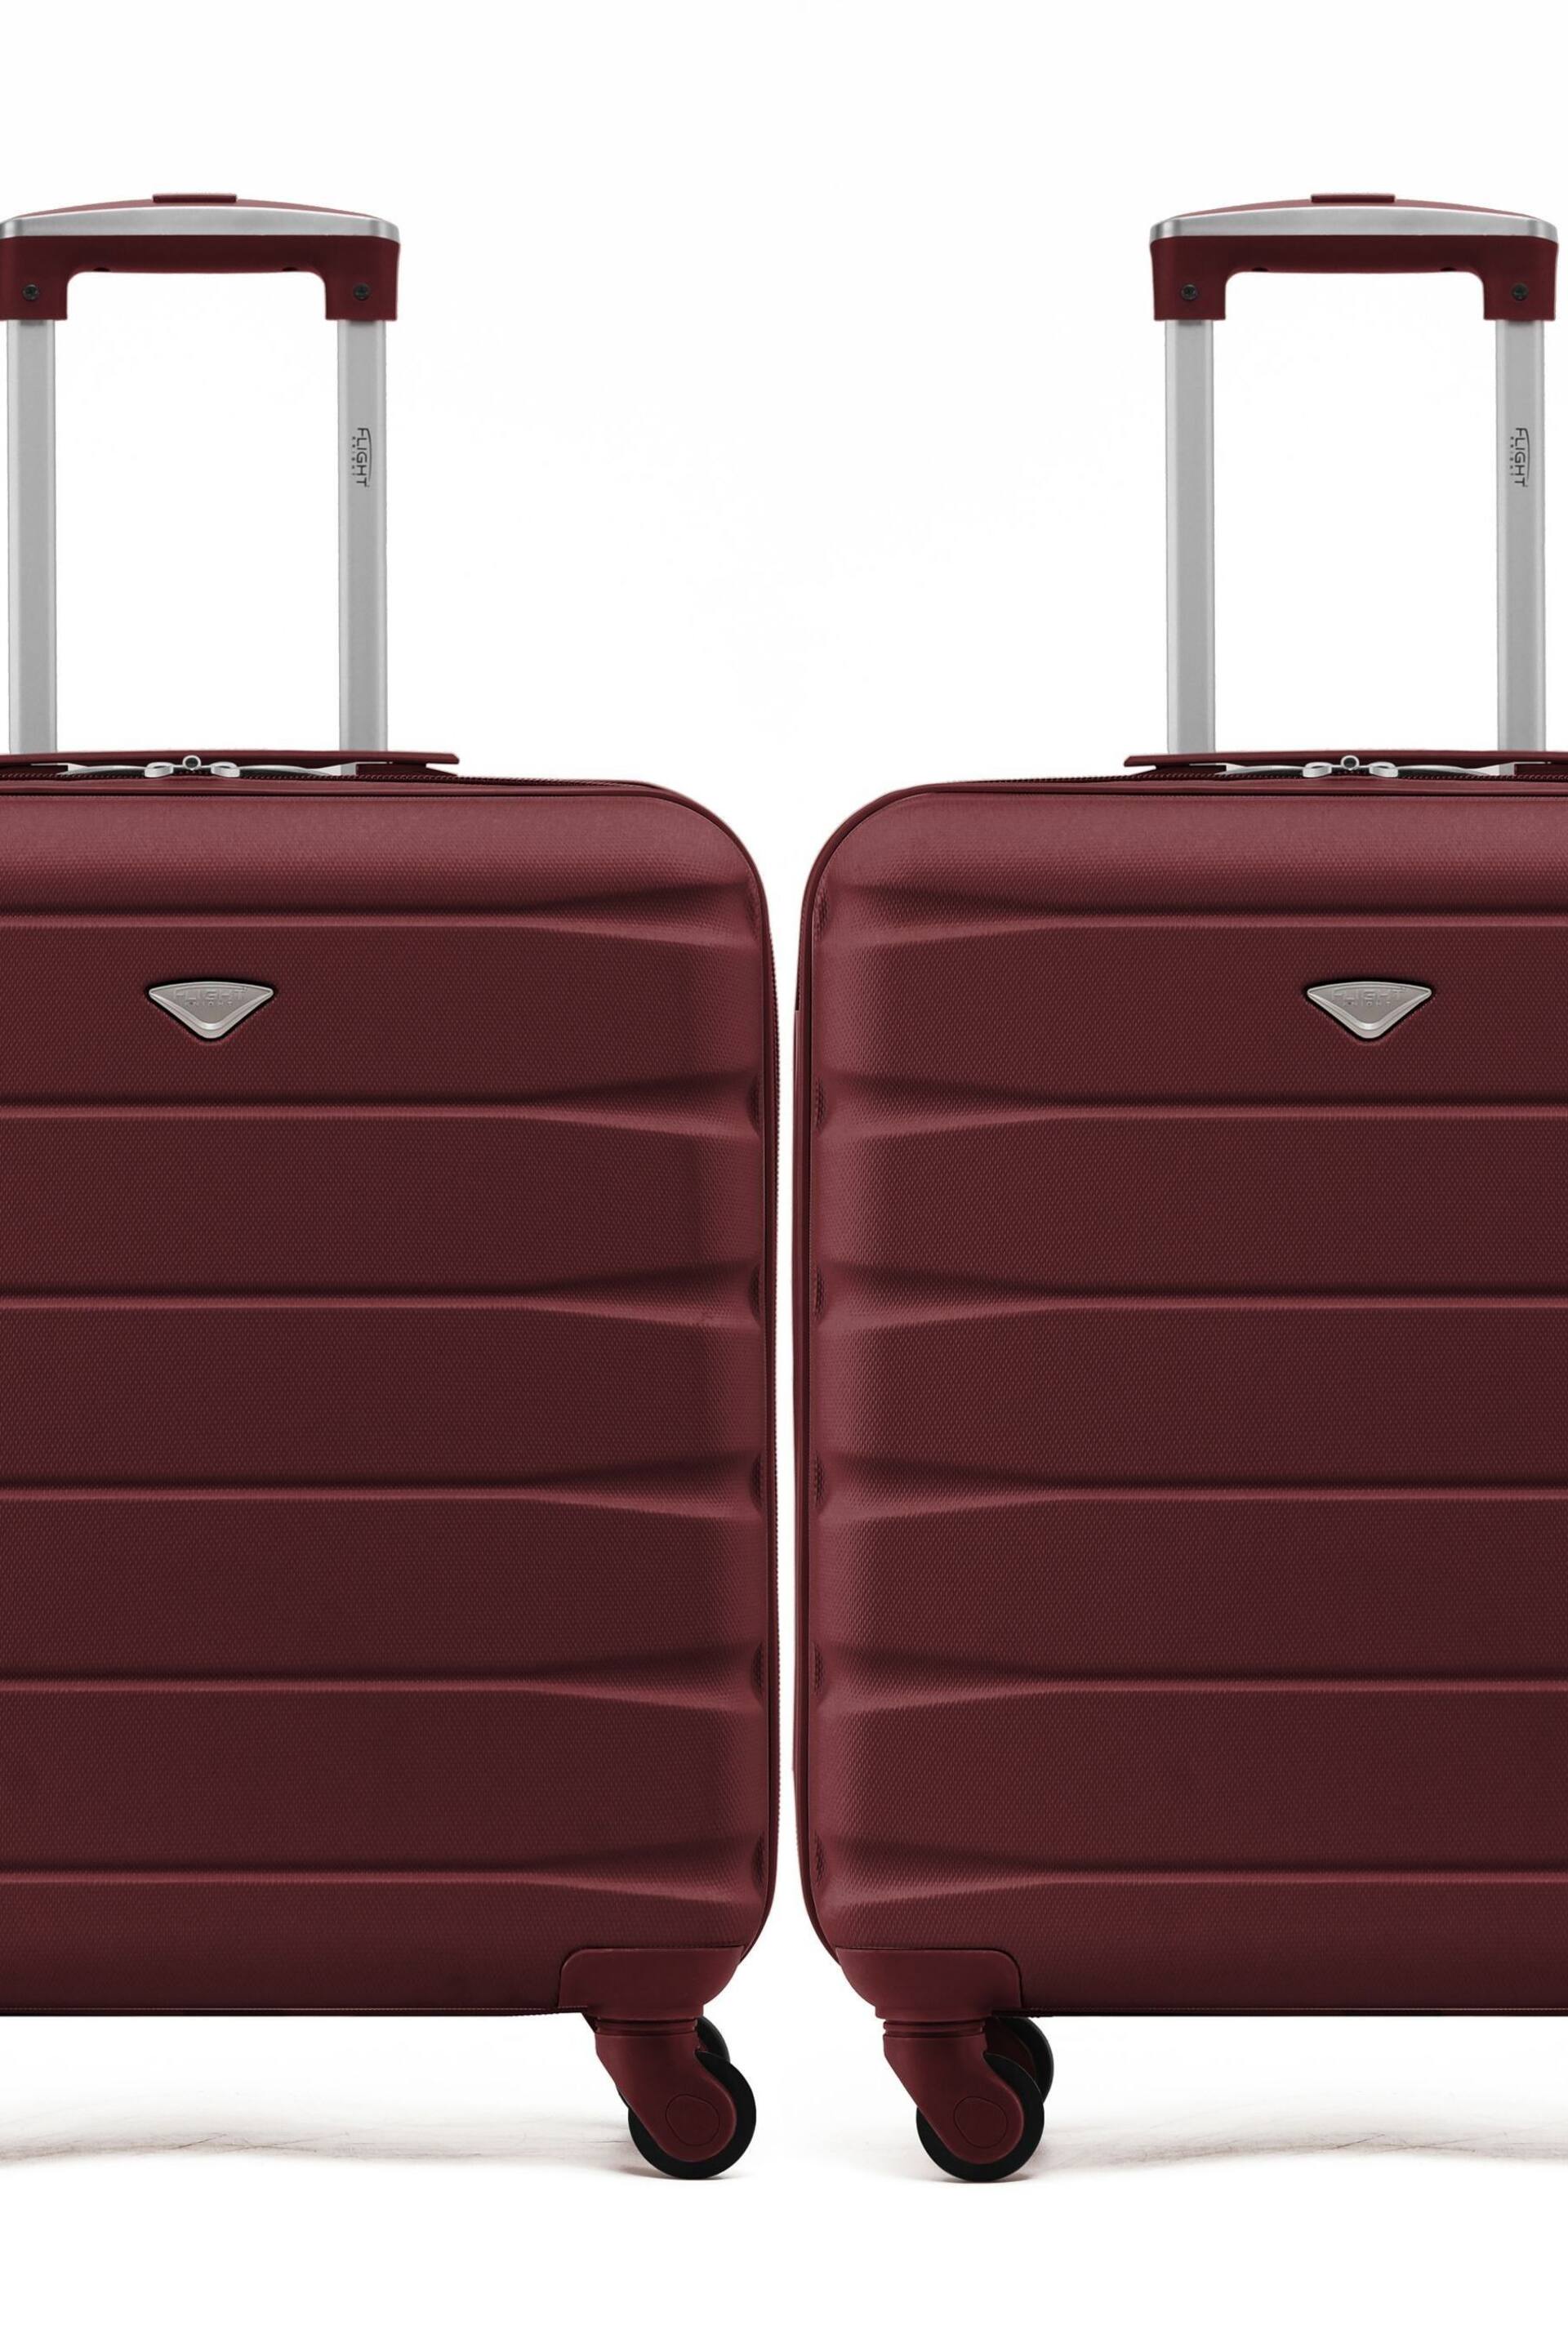 Flight Knight Burgundy + Burgundy EasyJet 56x45x25cm Overhead 4 Wheel ABS Hard Case Cabin Carry On Suitcase Set Of 2 - Image 2 of 8